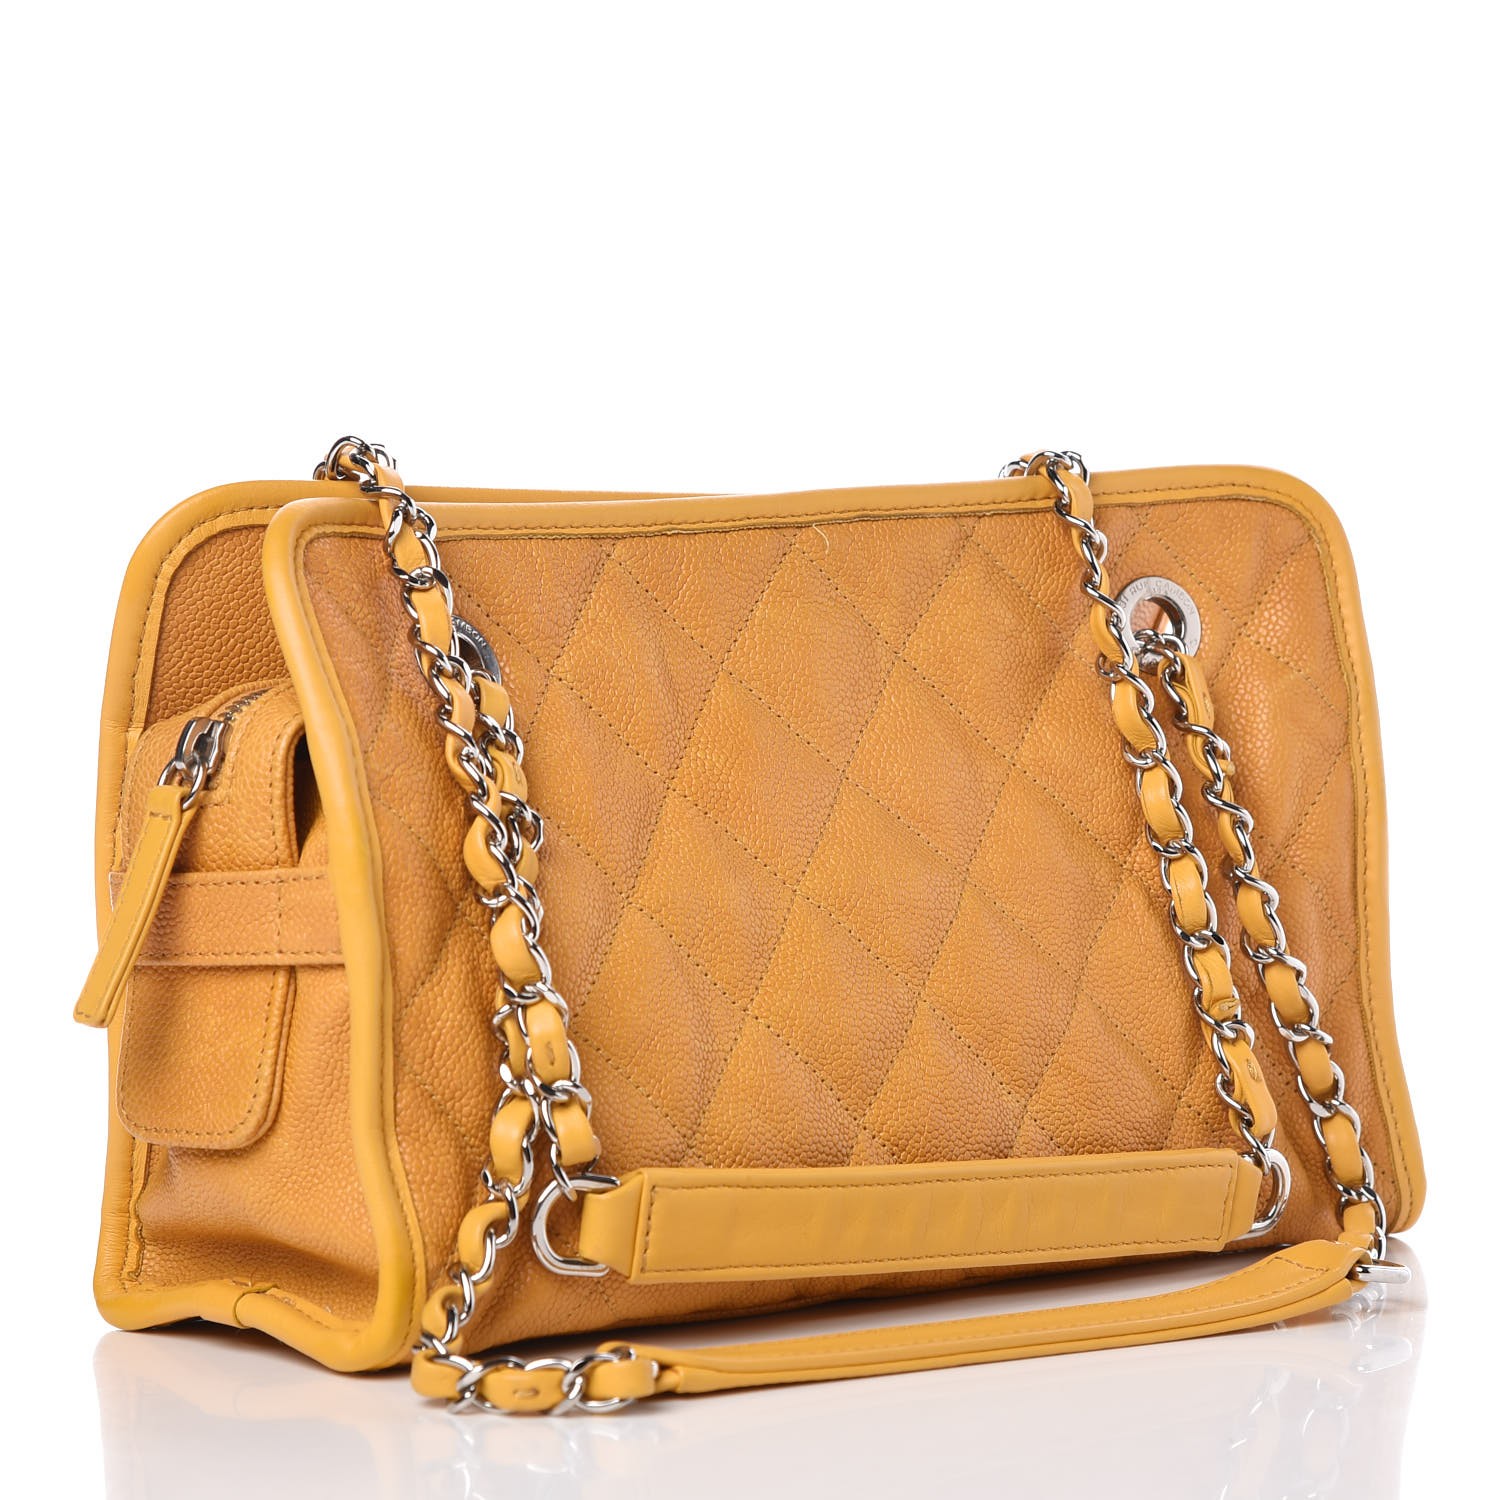 CHANEL Caviar Quilted Small Casual Riviera Zip Shoulder Bag Yellow 328679